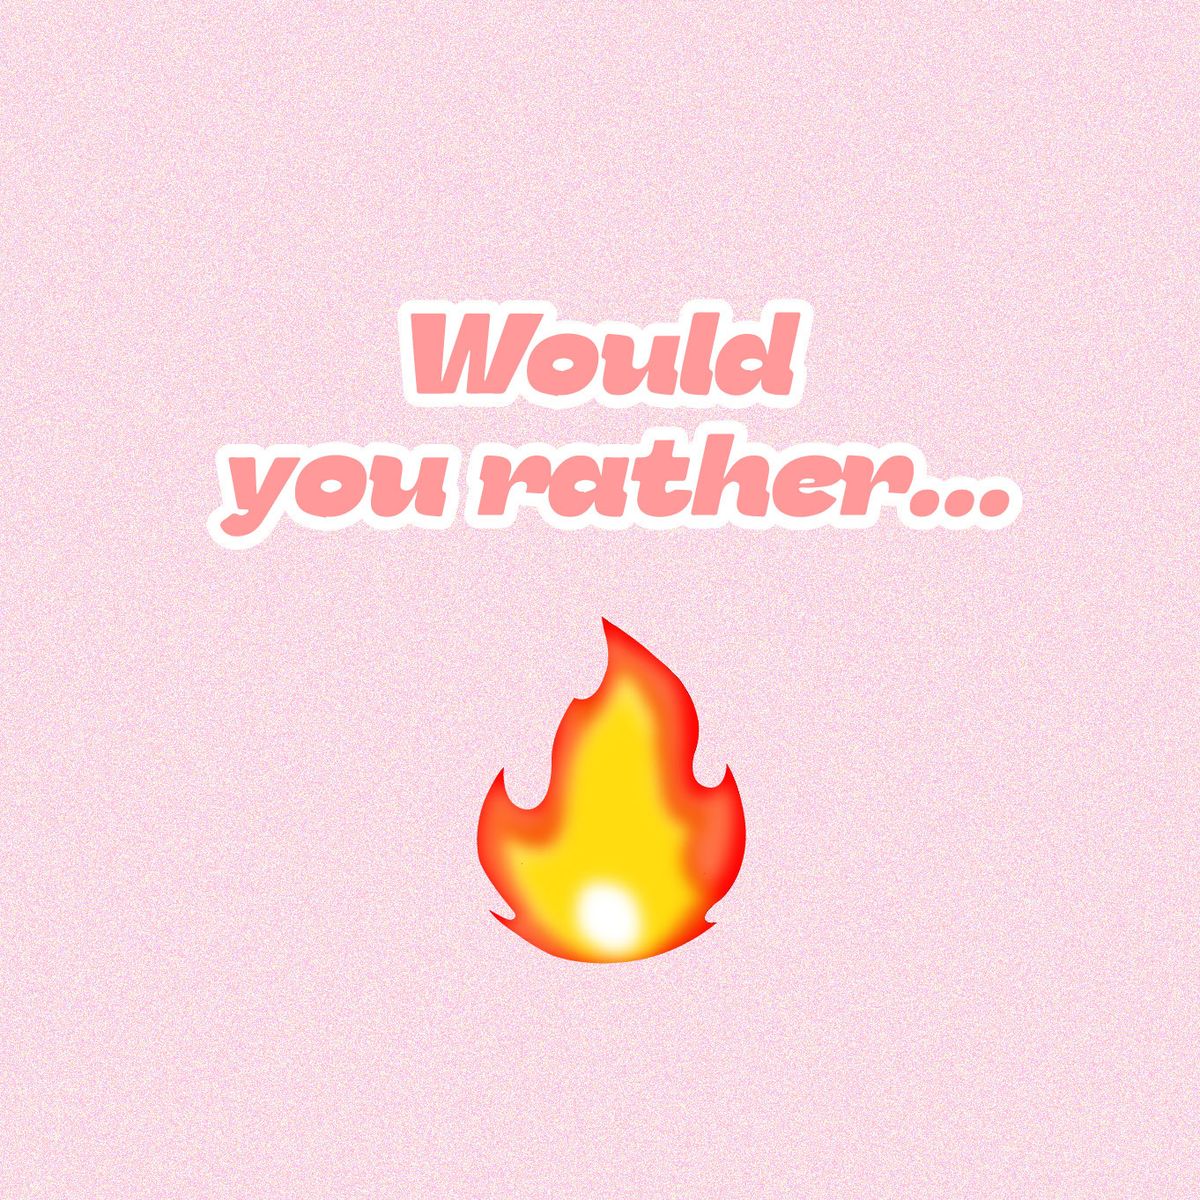 300+ Would You Rather Questions: The Ultimate List